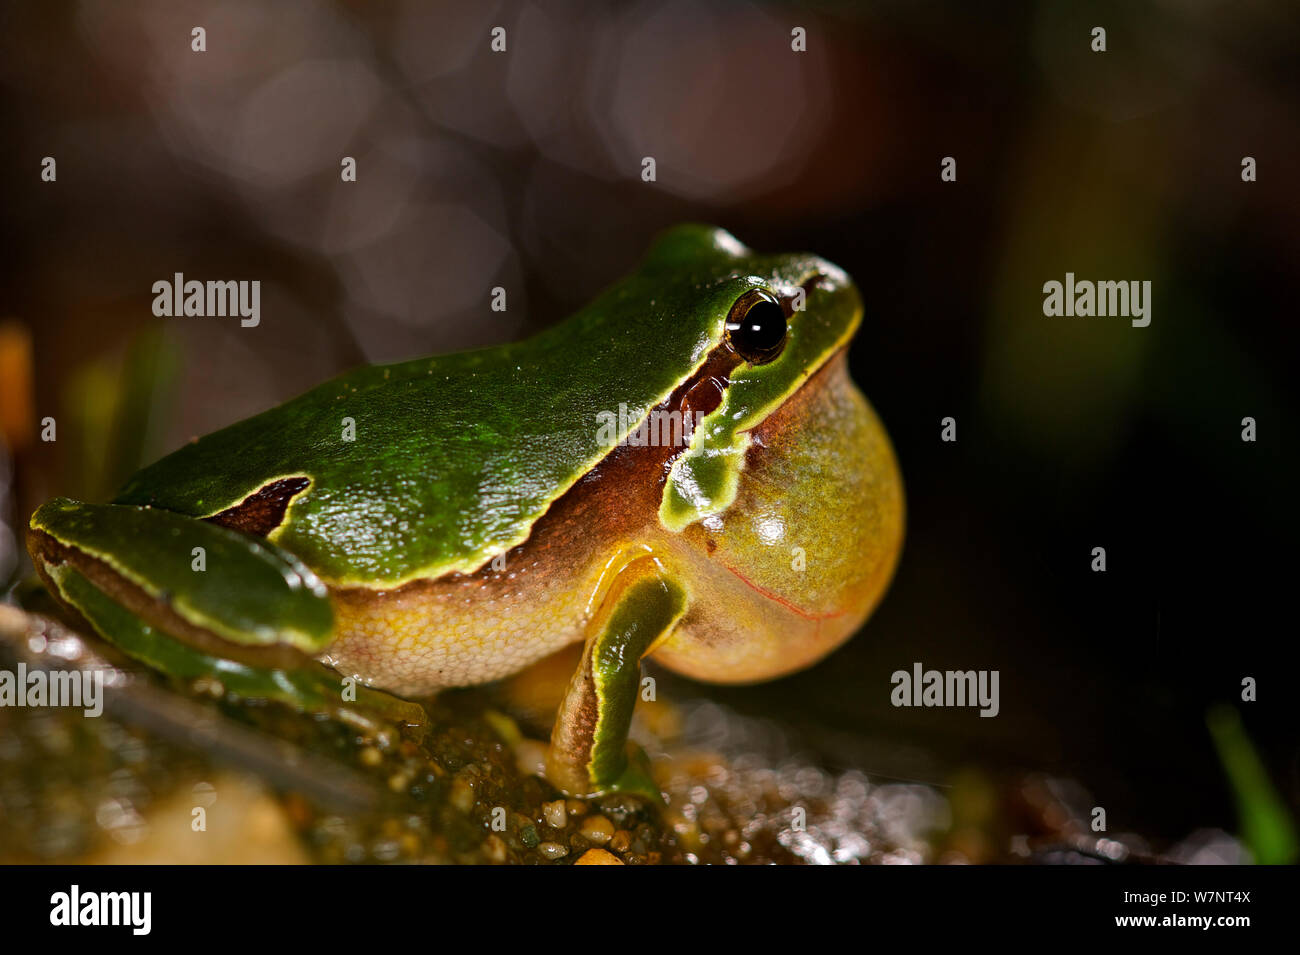 Male Iberian tree frog (Hyla molleri) calling, vocal sac inflated, Spain, April. Stock Photo